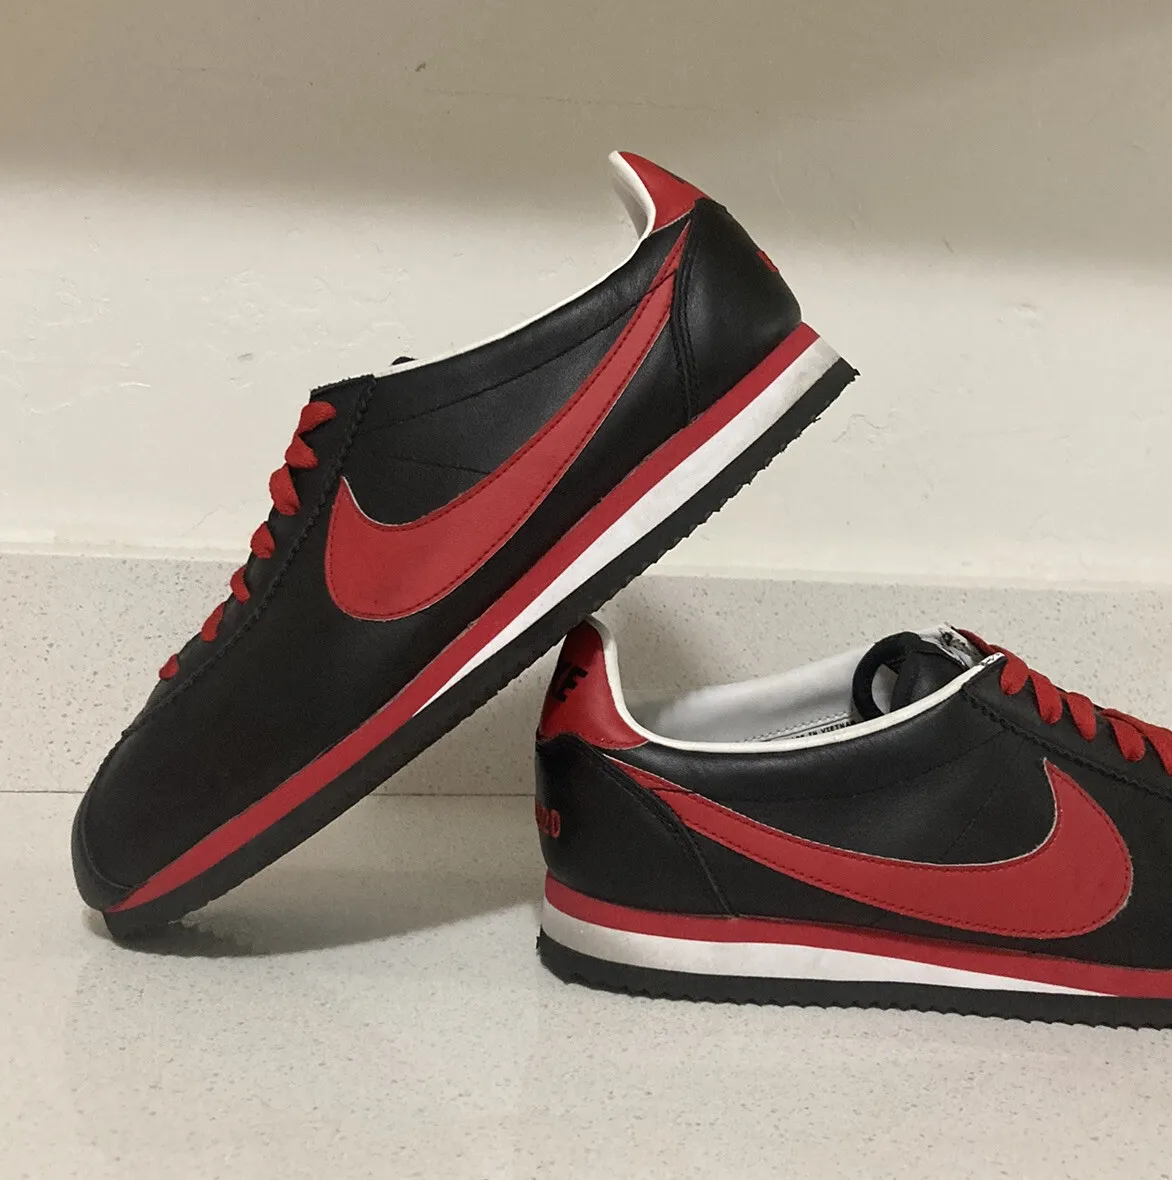 Nike Id Cortez Black/Fire Red Leather Athletic Shoes Men'S Size Us10.5  Preowned | Ebay